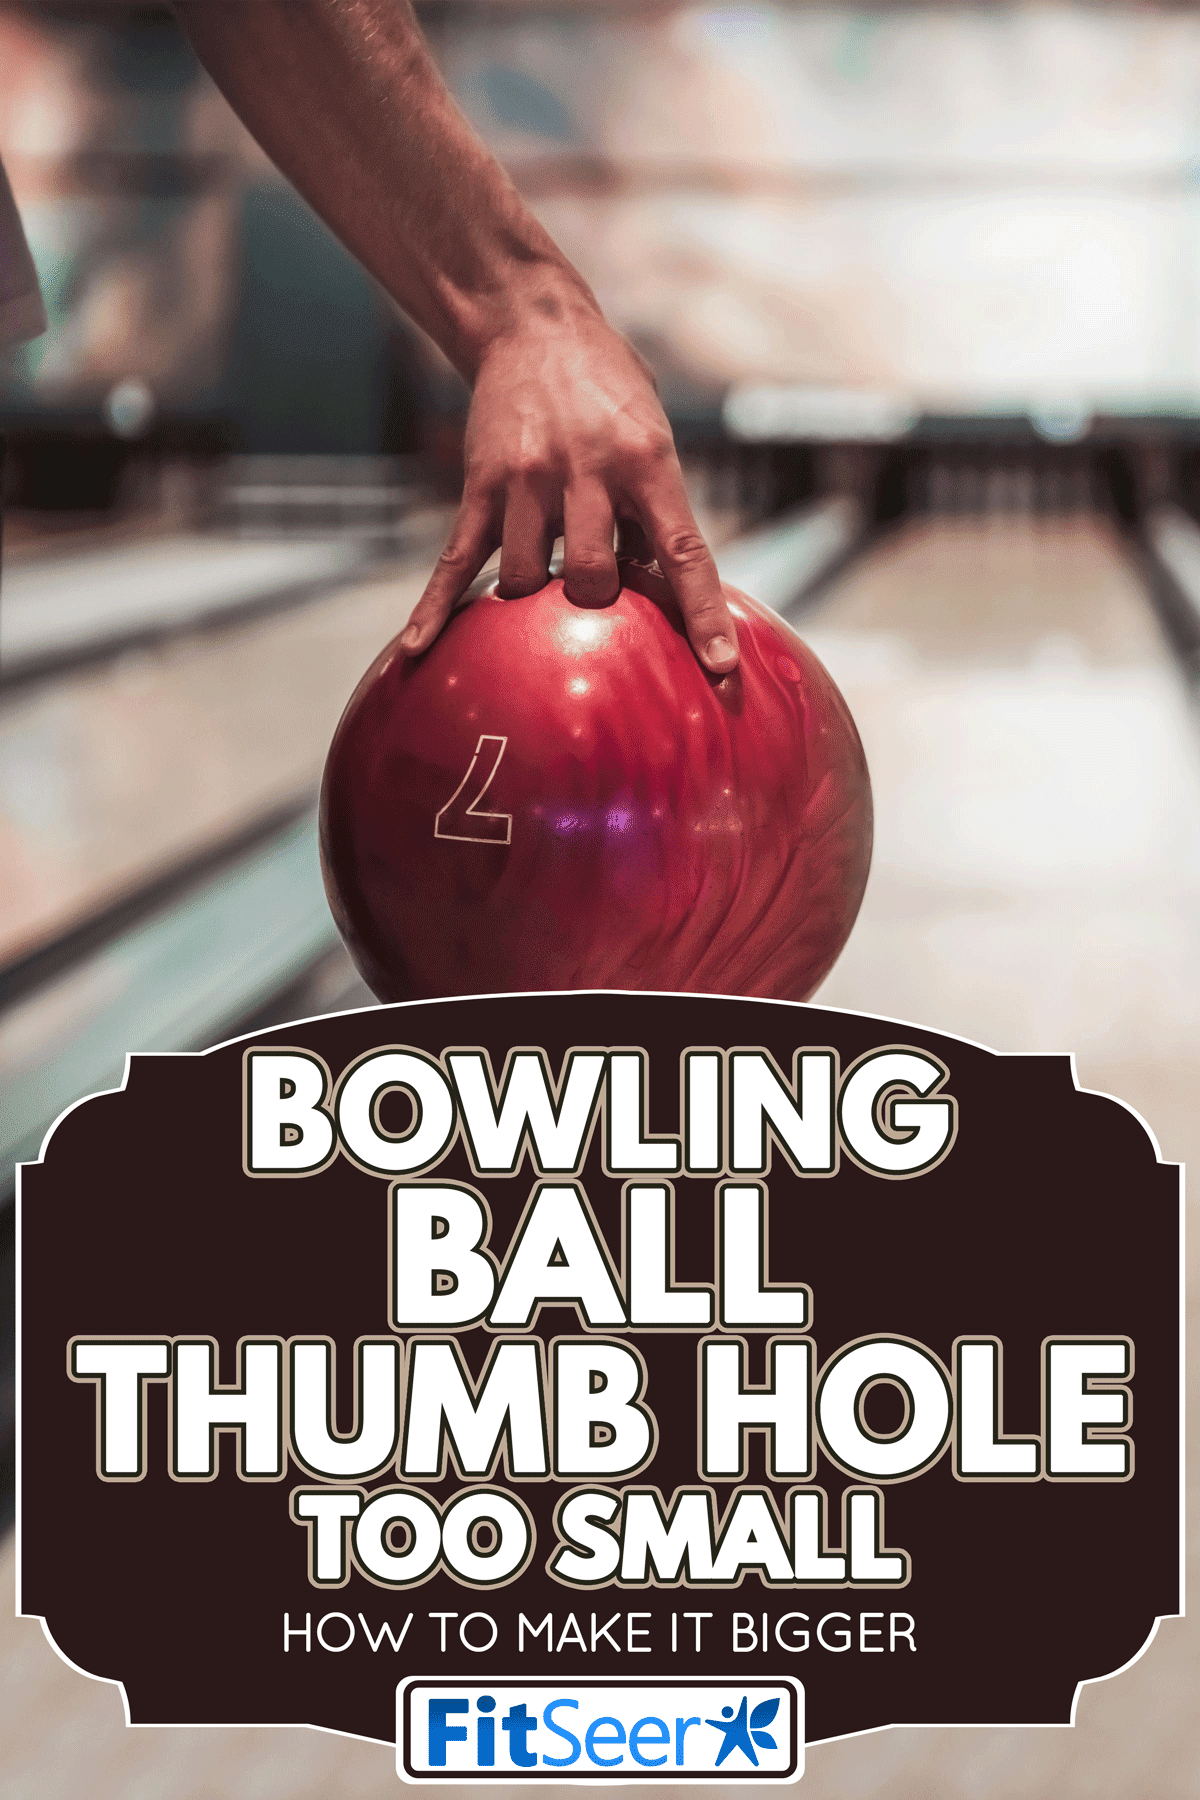 Man's hand holding a red bowling ball ready to throw it, Bowling Ball Thumb Hole Too Small [How To Make It Bigger]